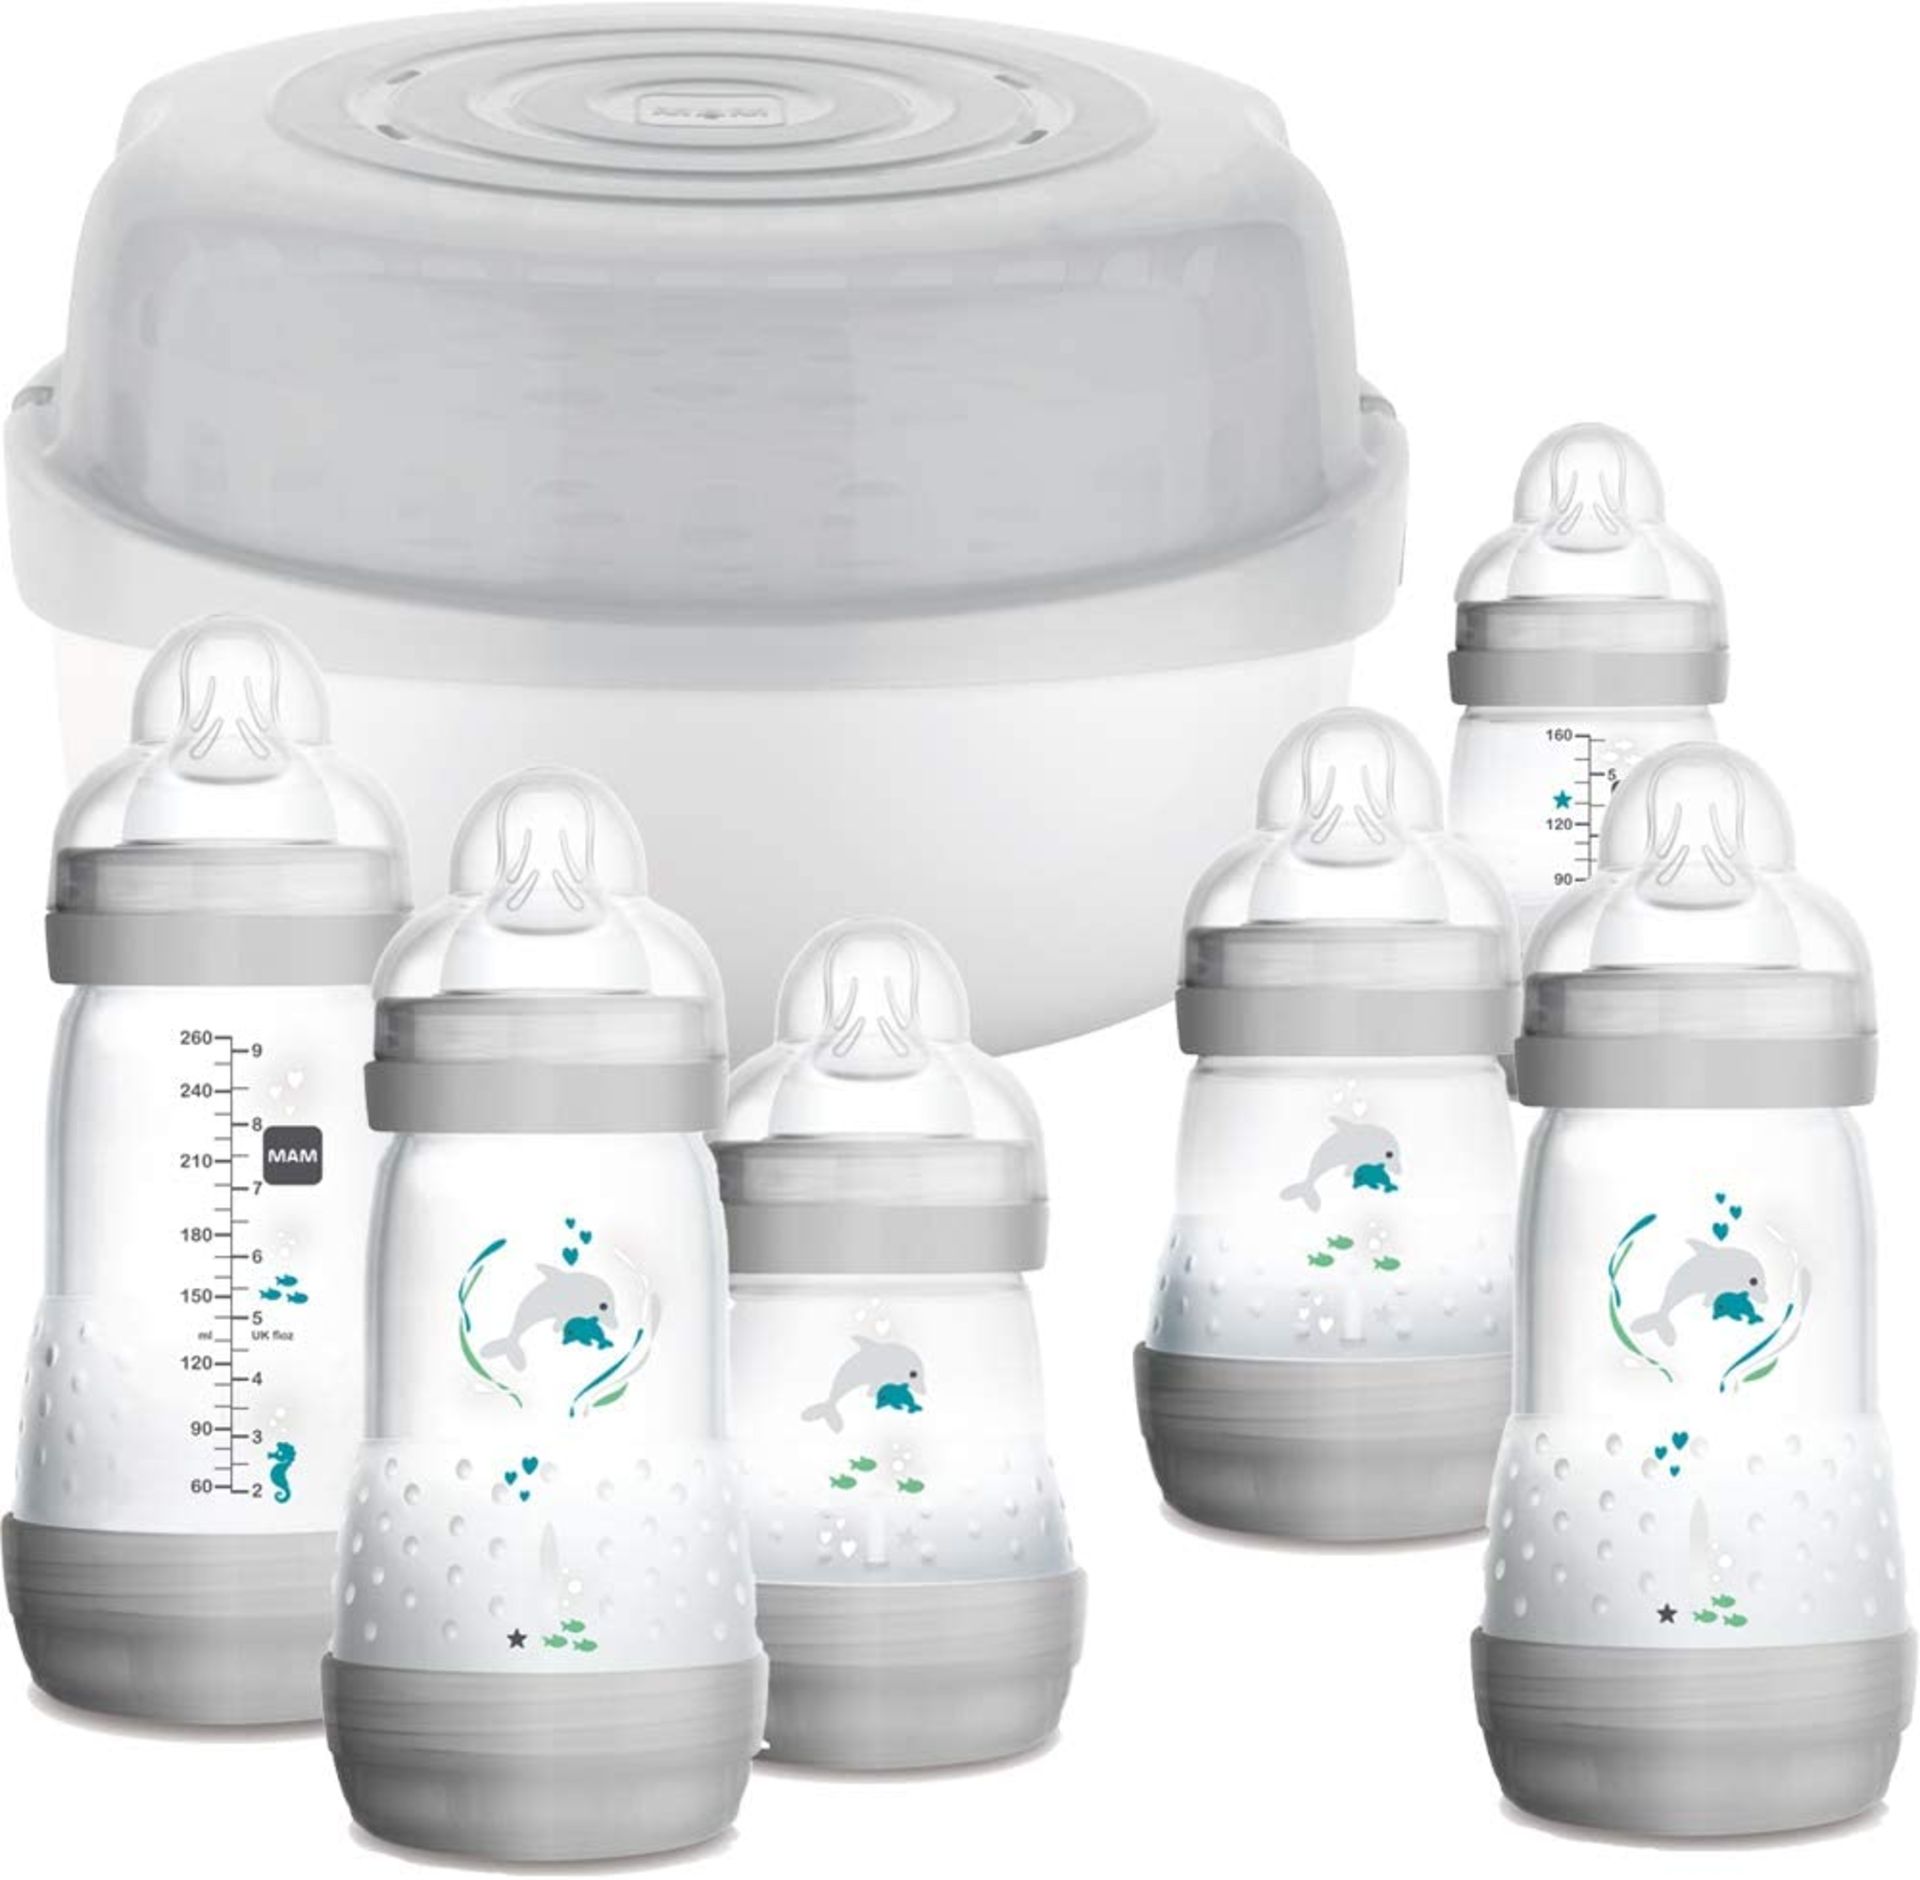 (R6E) Baby. 2 Items. 1 X MAM 2 In 1 Single Breast Pump & 1 X MAM Easy Start Bottle & Microwave Ster - Image 2 of 3